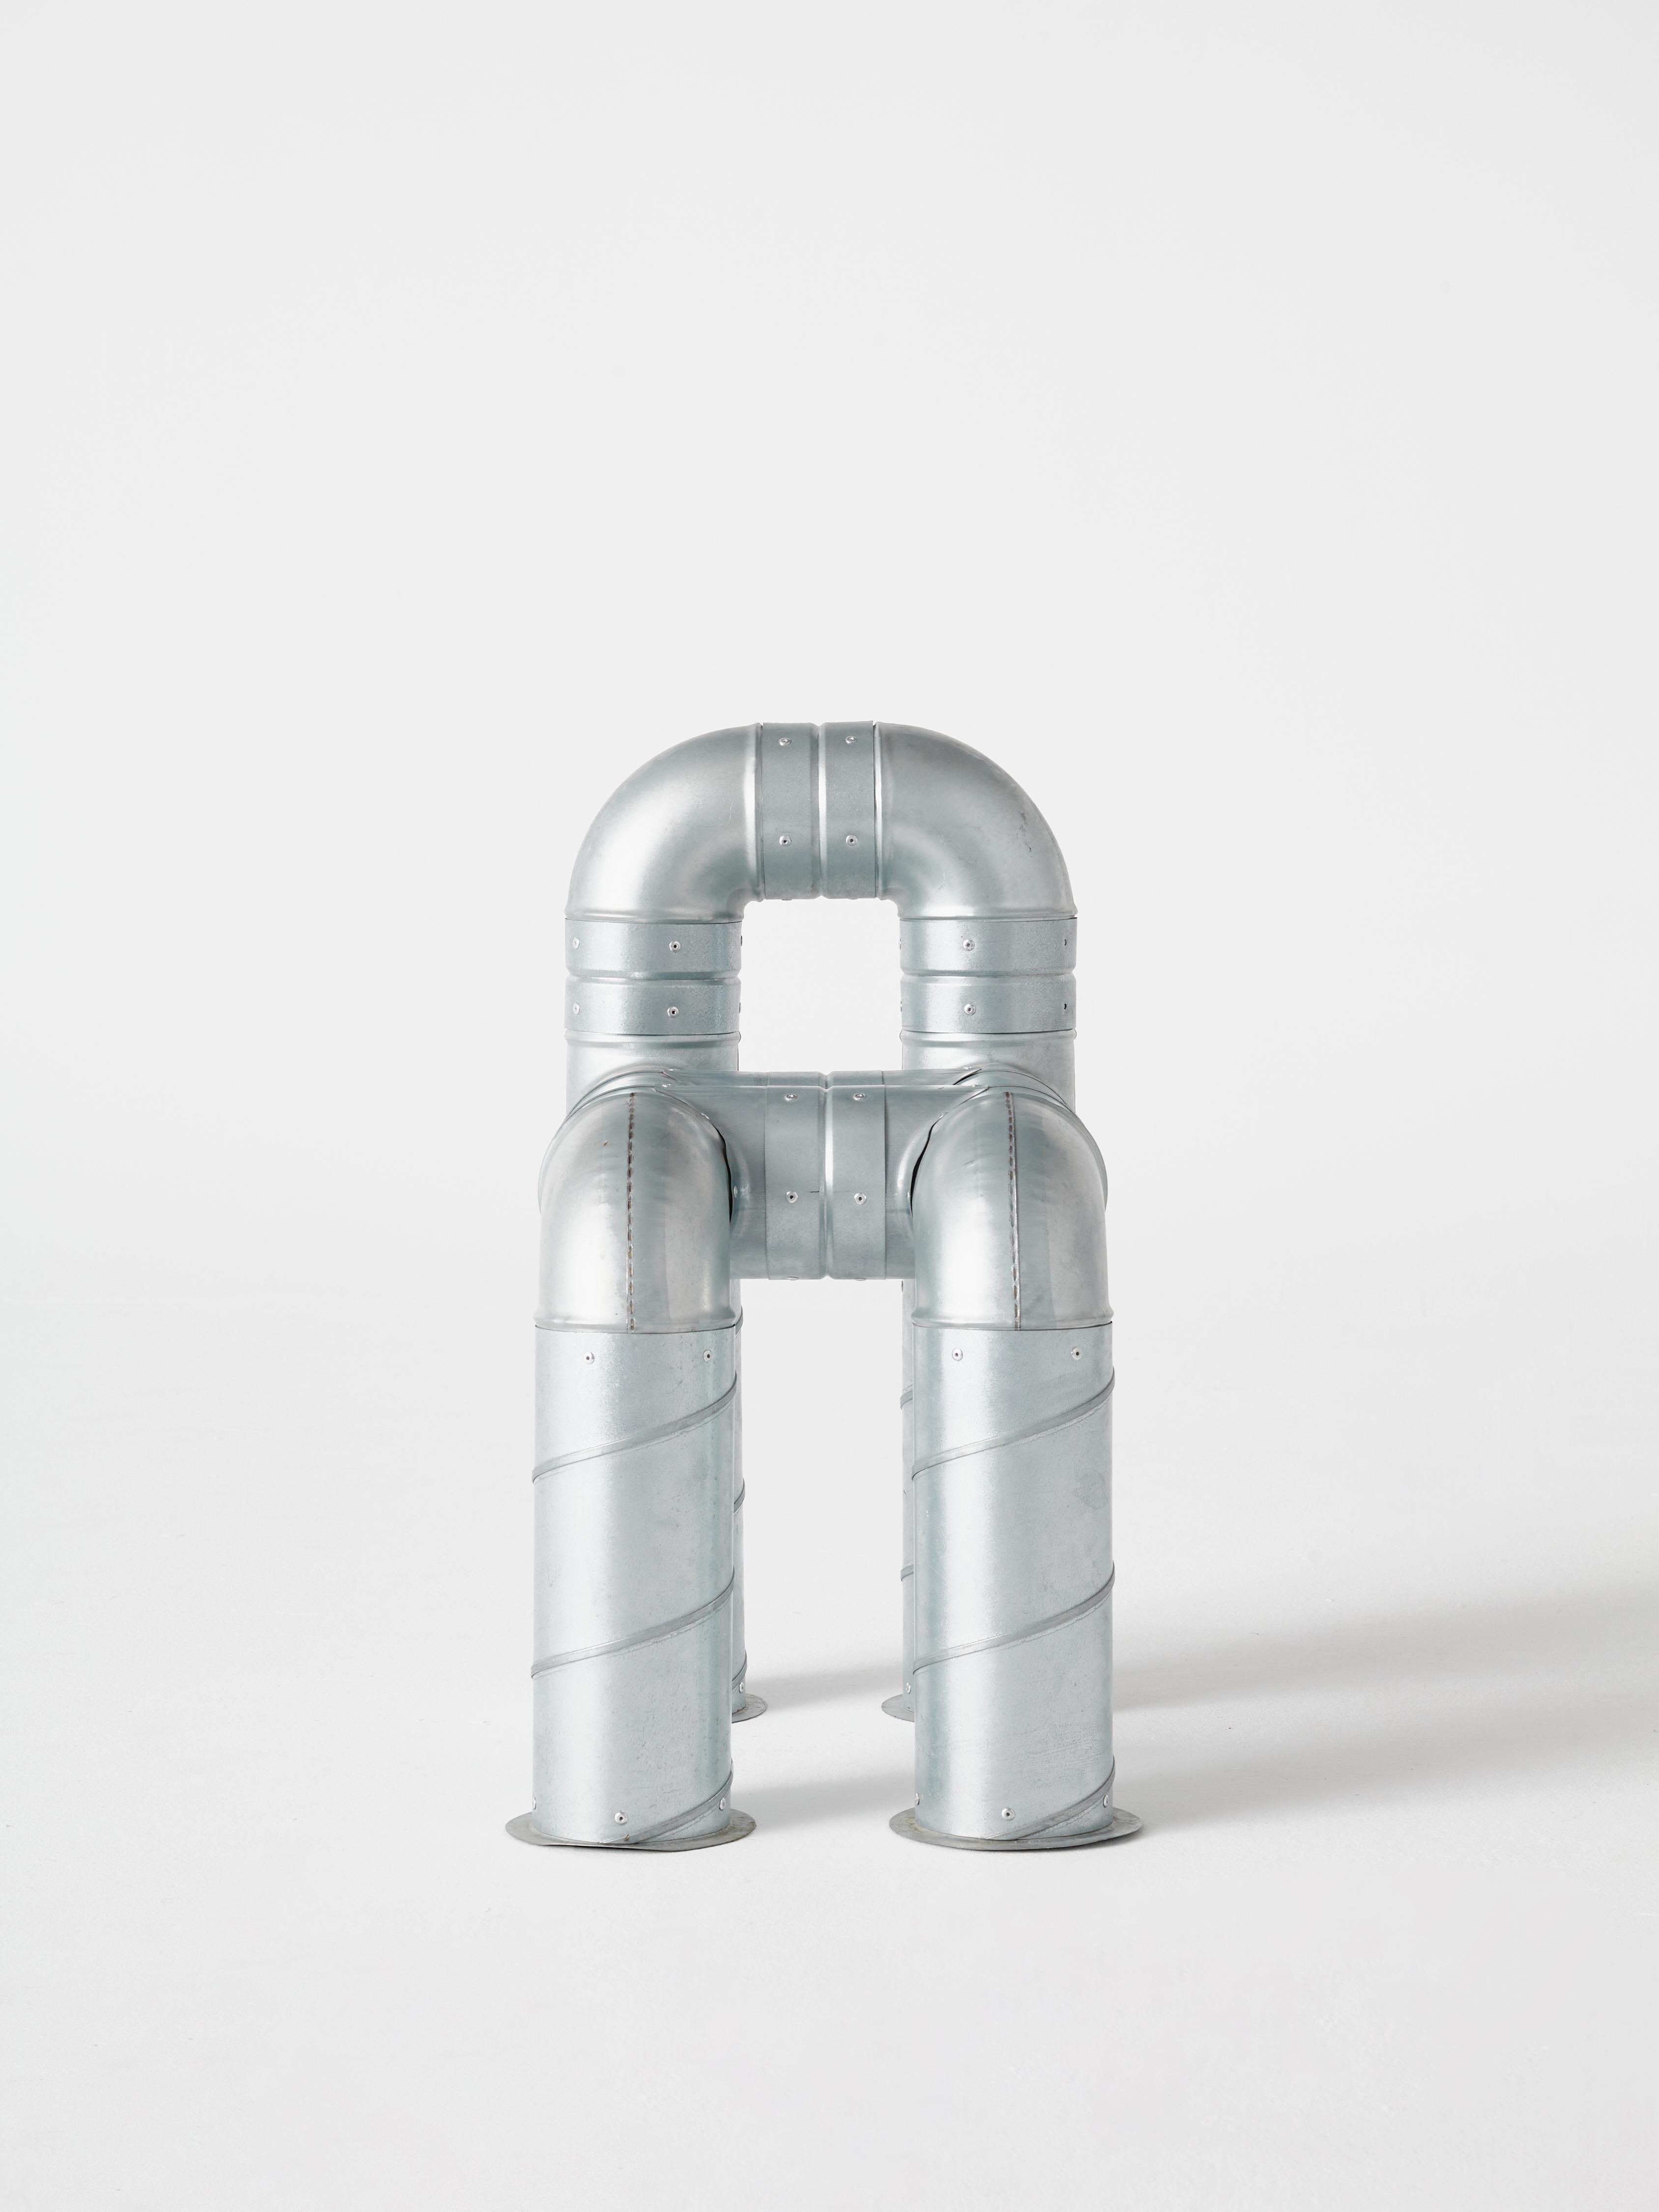 This Tubular Steel Chair forms part of the Series O.F.I.S (Objects From Intersticial Space), an ongoing research of industrial material's potential for narrative. Muñoz designed this Tubular Chair as an exploration of the structural potential of